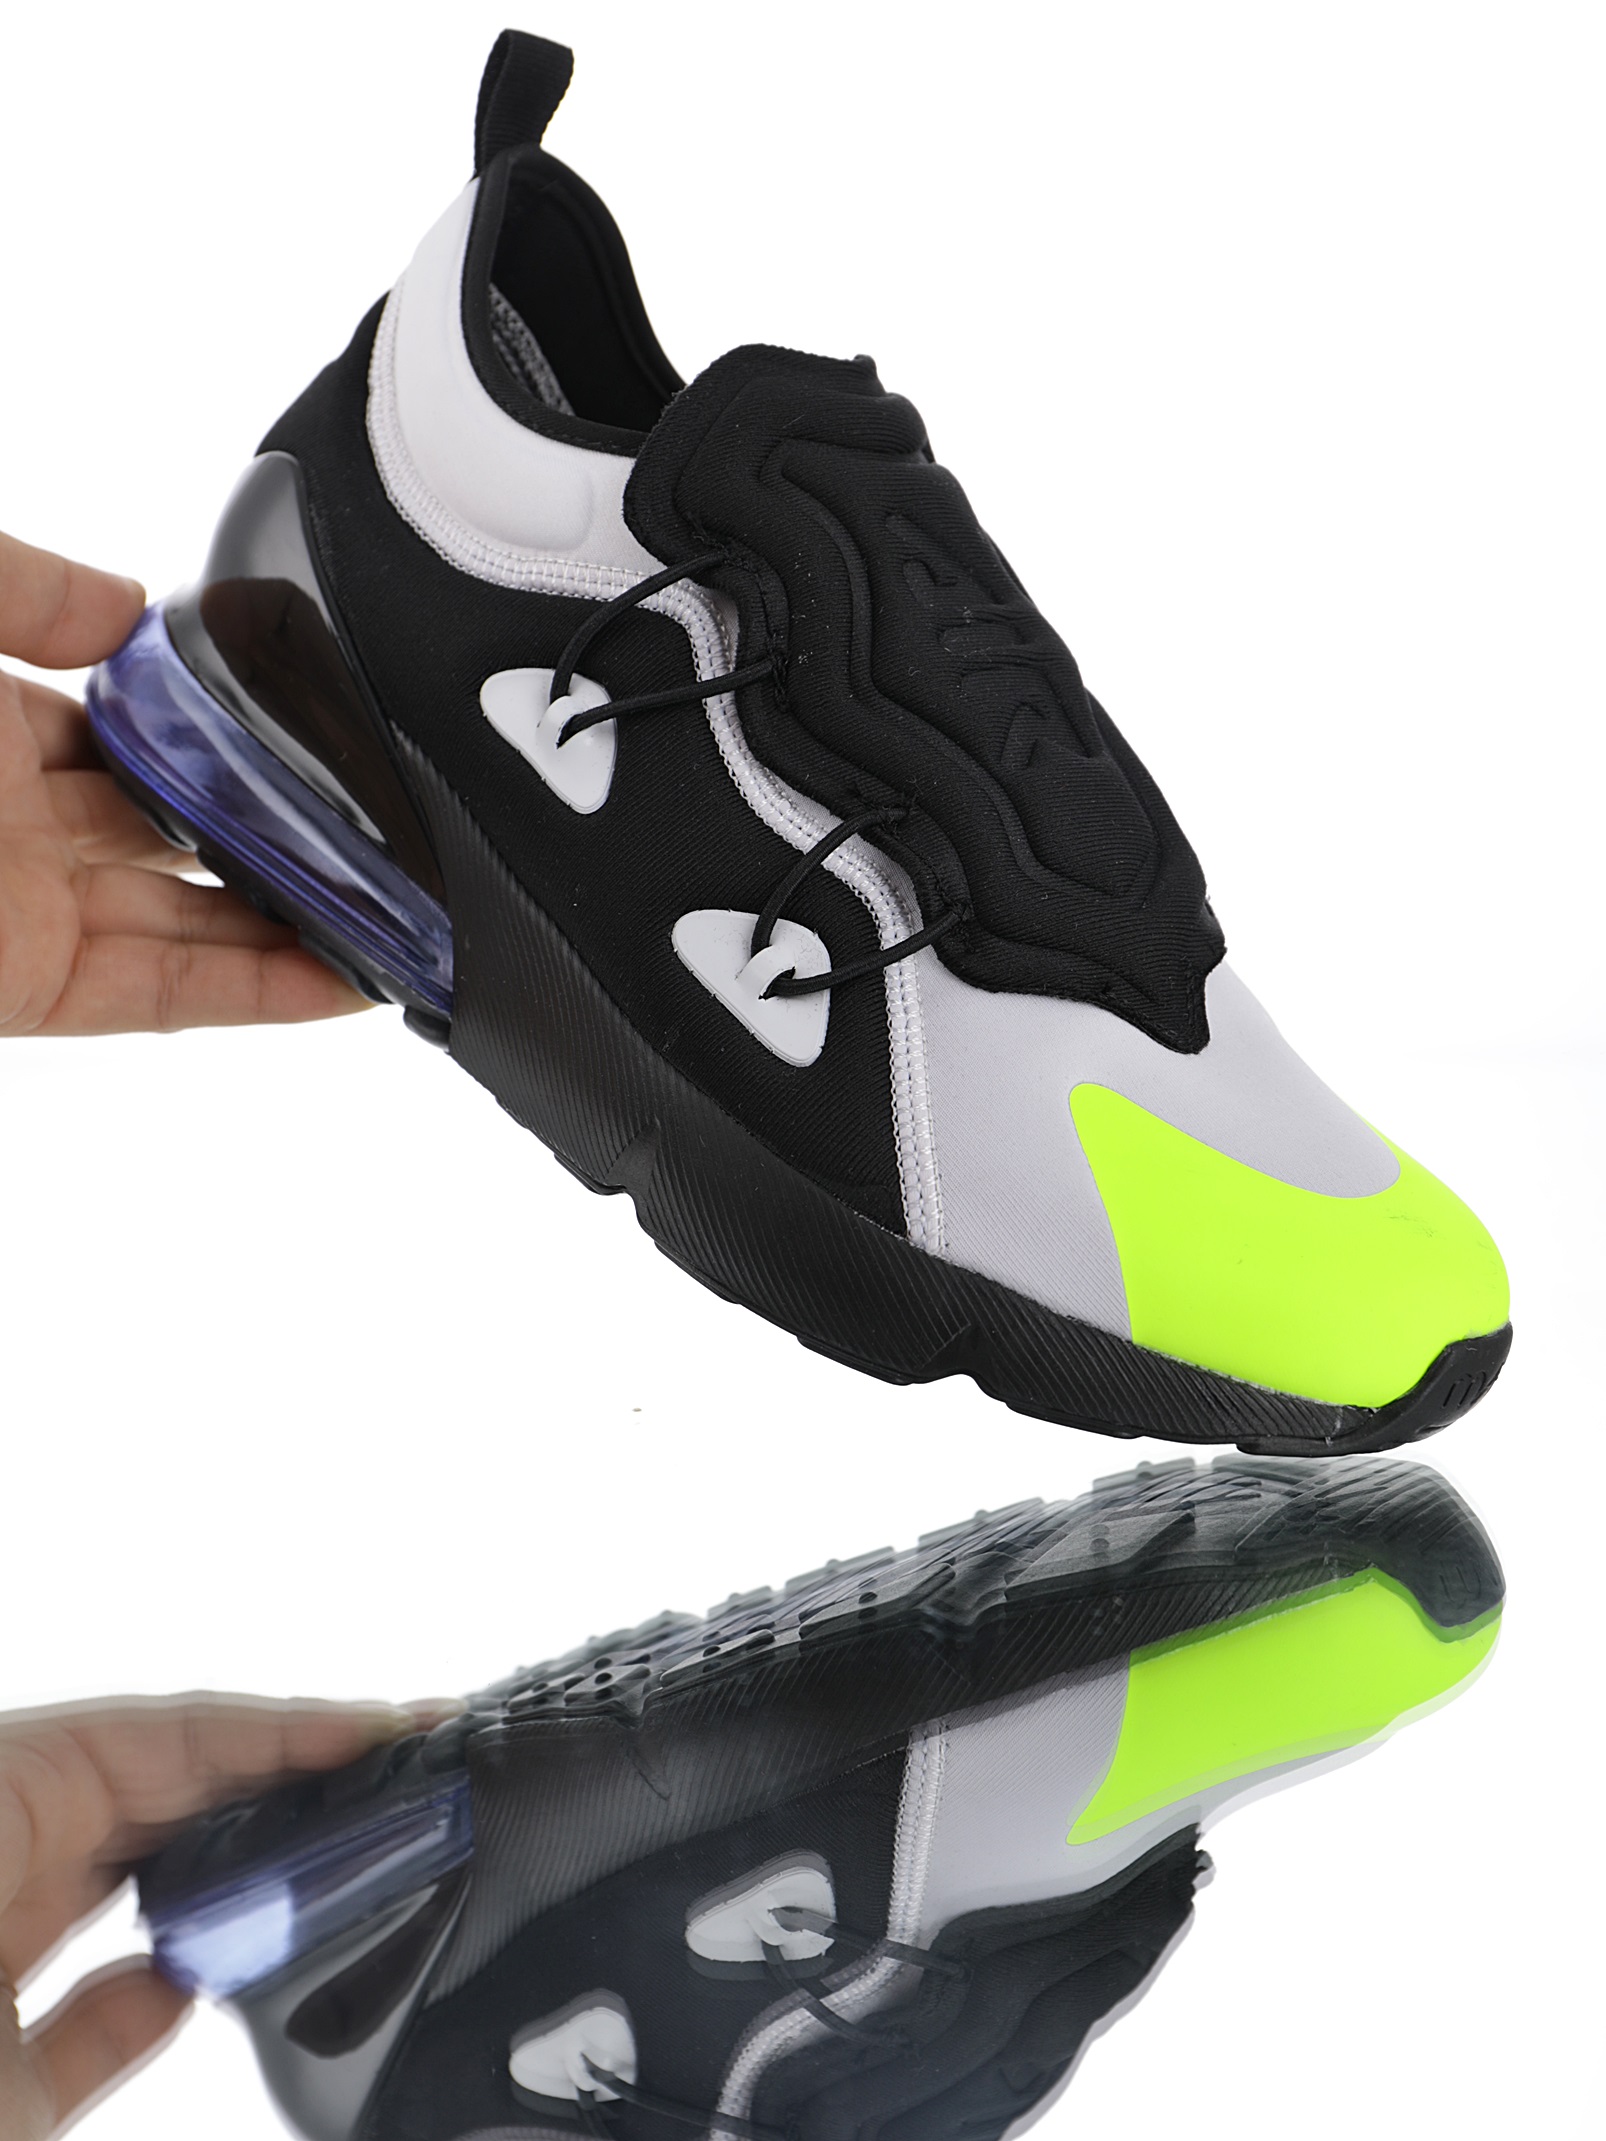 Nike Air Max 270 Socks Black And White Yellow Cost Effective